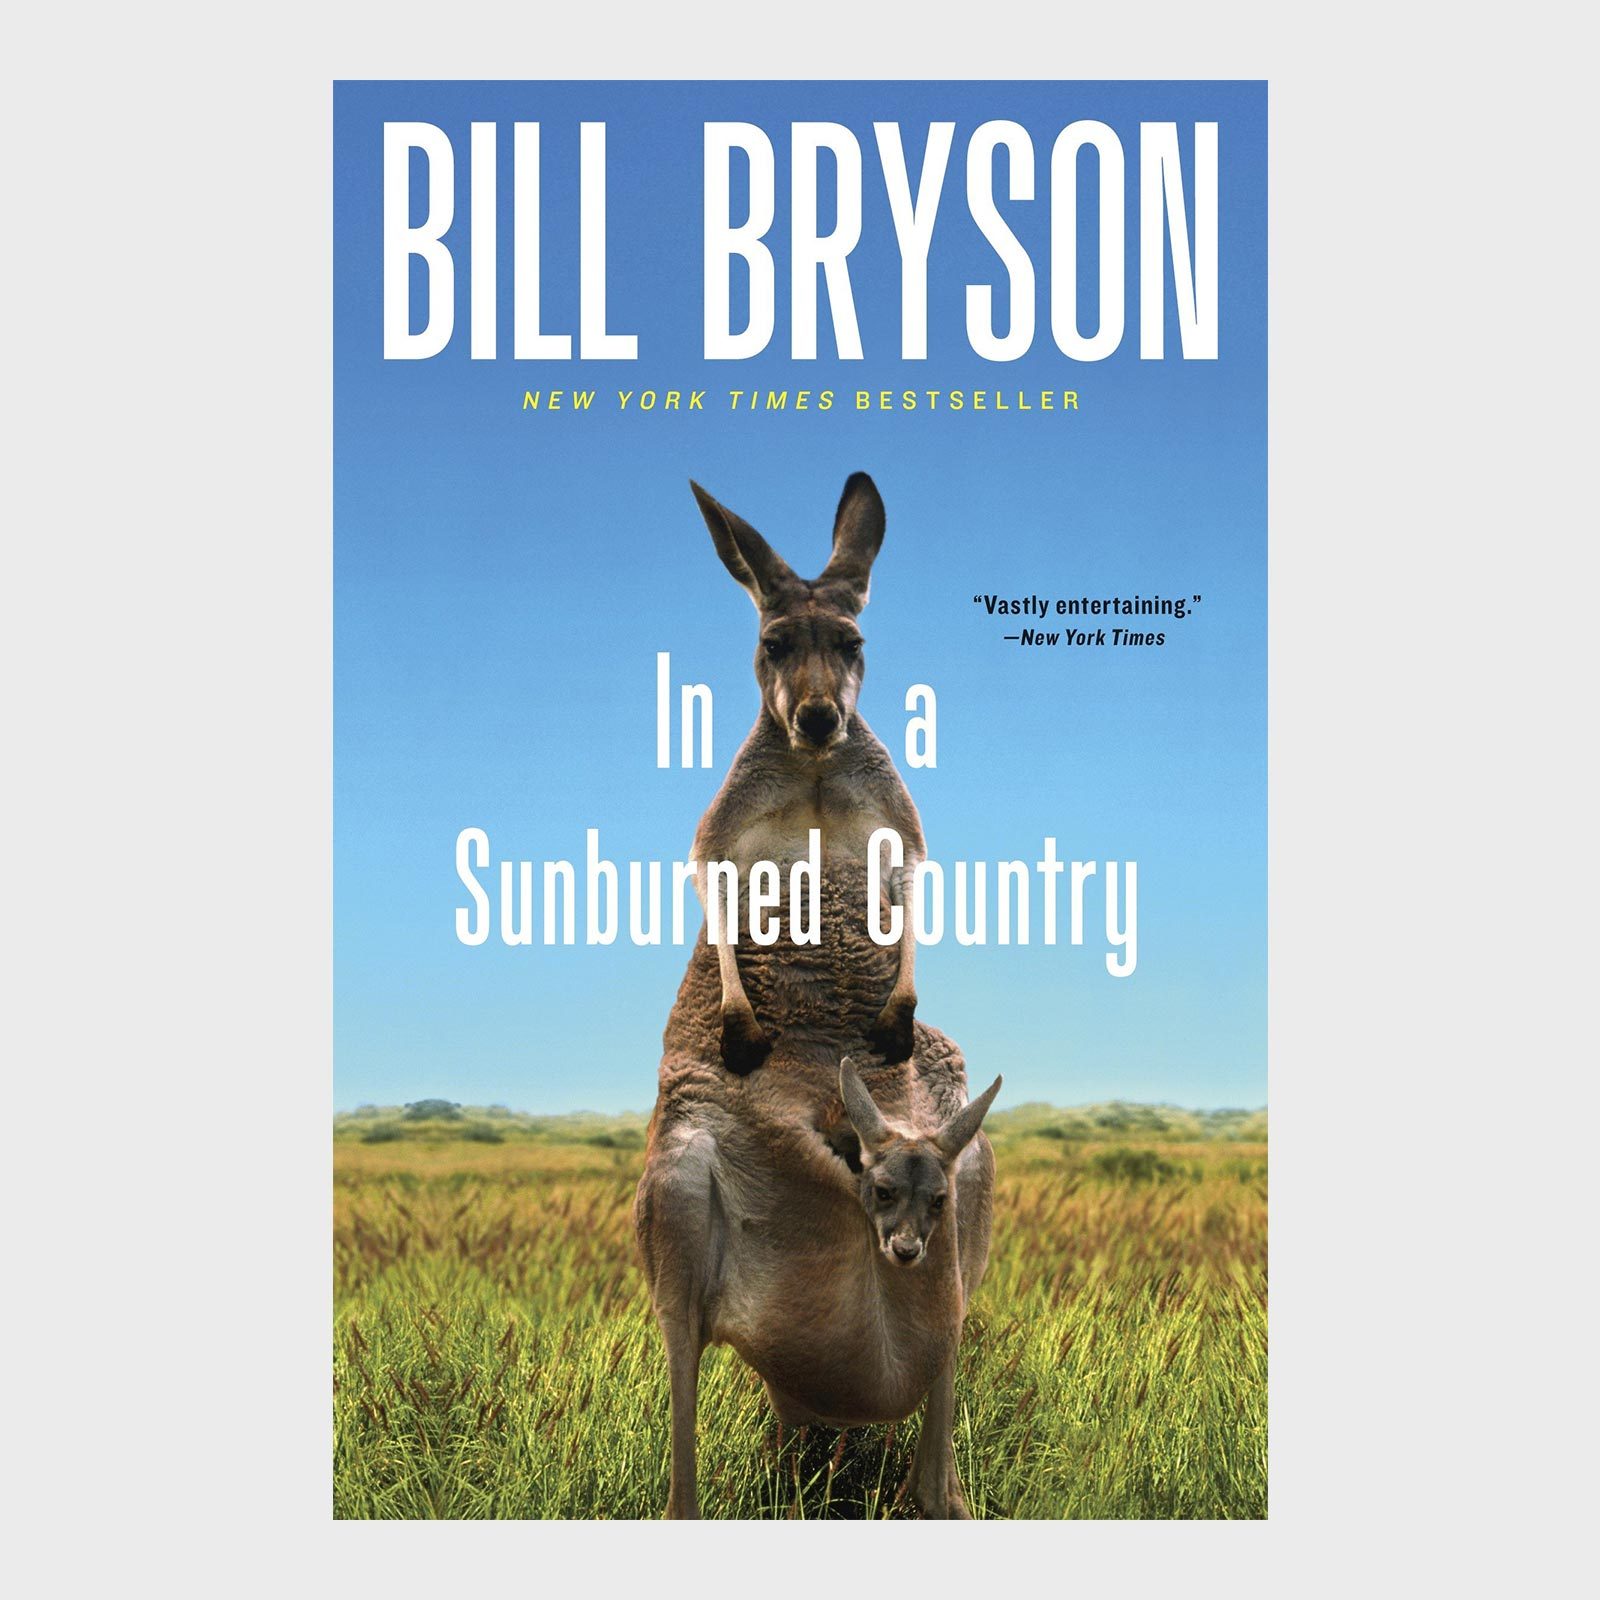 <h3><em>In a Sunburned Country </em>by Bill Bryson</h3> <p><strong>Setting:</strong> Australia</p> <p>Bill Bryson has written stacks of <a href="https://www.rd.com/list/best-nonfiction-books/" rel="noopener noreferrer">nonfiction books</a>, but his droll, sharply observant travelogue through Australia is perhaps his most vivid. The so-called Land of Oz roars to life in Bryson's descriptions of traveling through its wild array of landscapes—bustling urban centers, scalding-hot mining country, scorching barren desert and wild, roiling coastlines. <em><a href="https://www.amazon.com/Sunburned-Country-Bill-Bryson/dp/0767903862" rel="noopener noreferrer">In a Sunburned Country</a> </em>(2000) is chock-full of exciting tidbits about the history and culture Down Under, as well as sidesplitting and terrifying encounters with locals and wildlife. Sure, he wrote a legendary Appalachian Trail memoir too—<em>A Walk in the Woods</em>—but we've already got that destination covered for you.</p> <p class="listicle-page__cta-button-shop"><a class="shop-btn" href="https://www.amazon.com/Sunburned-Country-Bill-Bryson/dp/0767903862">Shop Now</a></p>